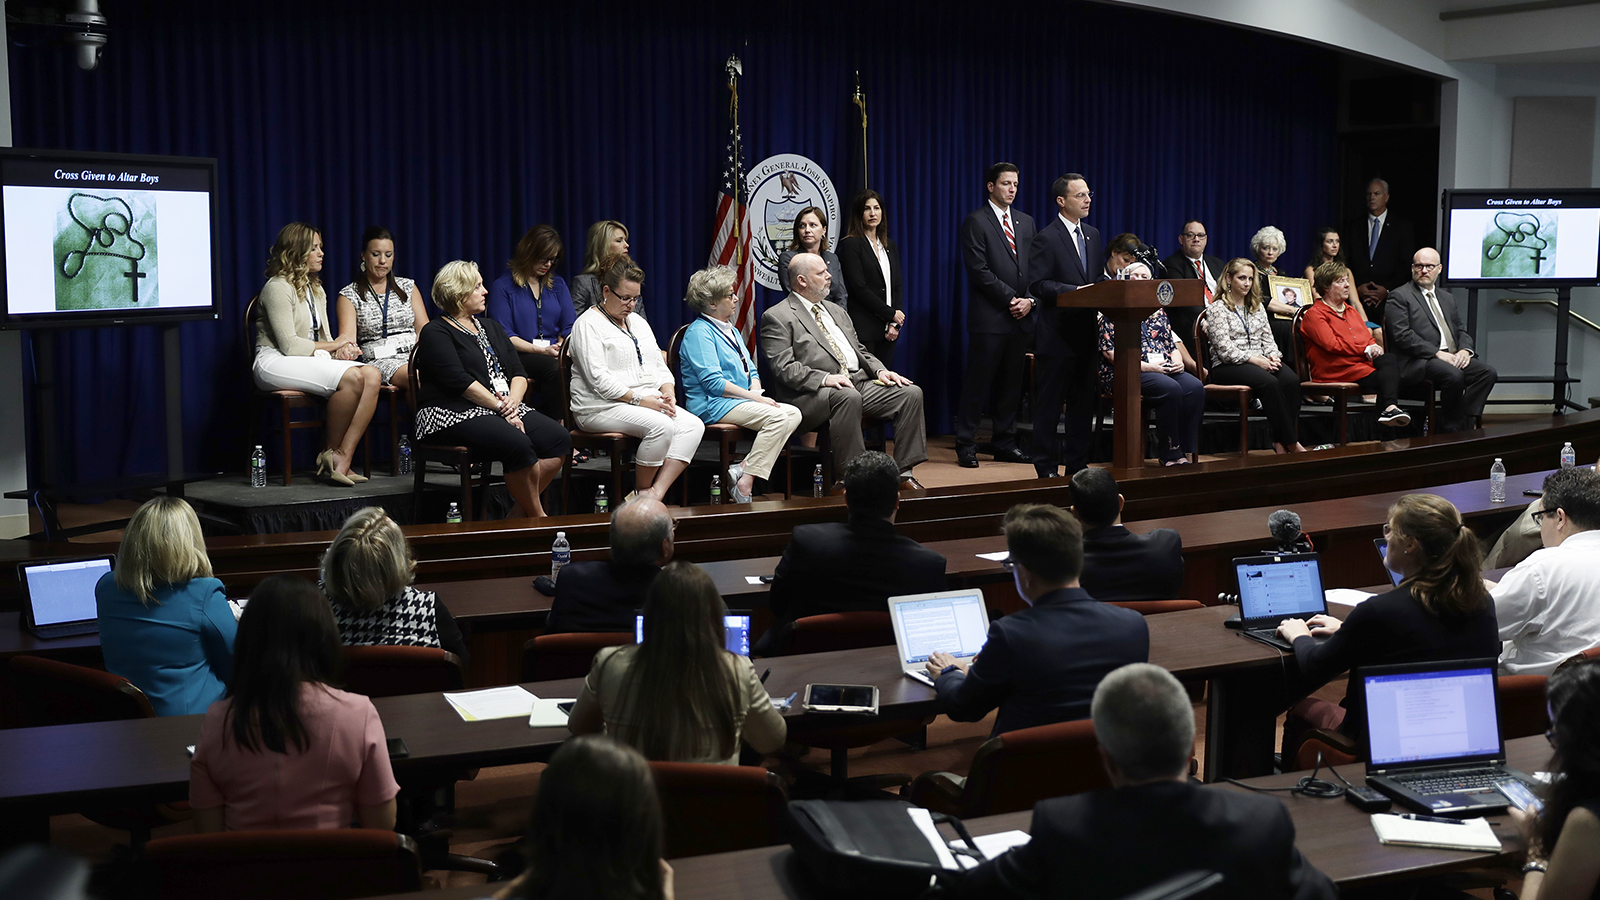 Pennsylvania Attorney General Josh Shapiro speaks during a news conference at the state Capitol in Harrisburg, Pa., on Aug. 14, 2018. A Pennsylvania grand jury says its investigation of clergy sexual abuse identified more than 1,000 child victims. The grand jury report says that number comes from records in six Roman Catholic dioceses. The people seated were some of those affected by the clergy abuse. (AP Photo/Matt Rourke)